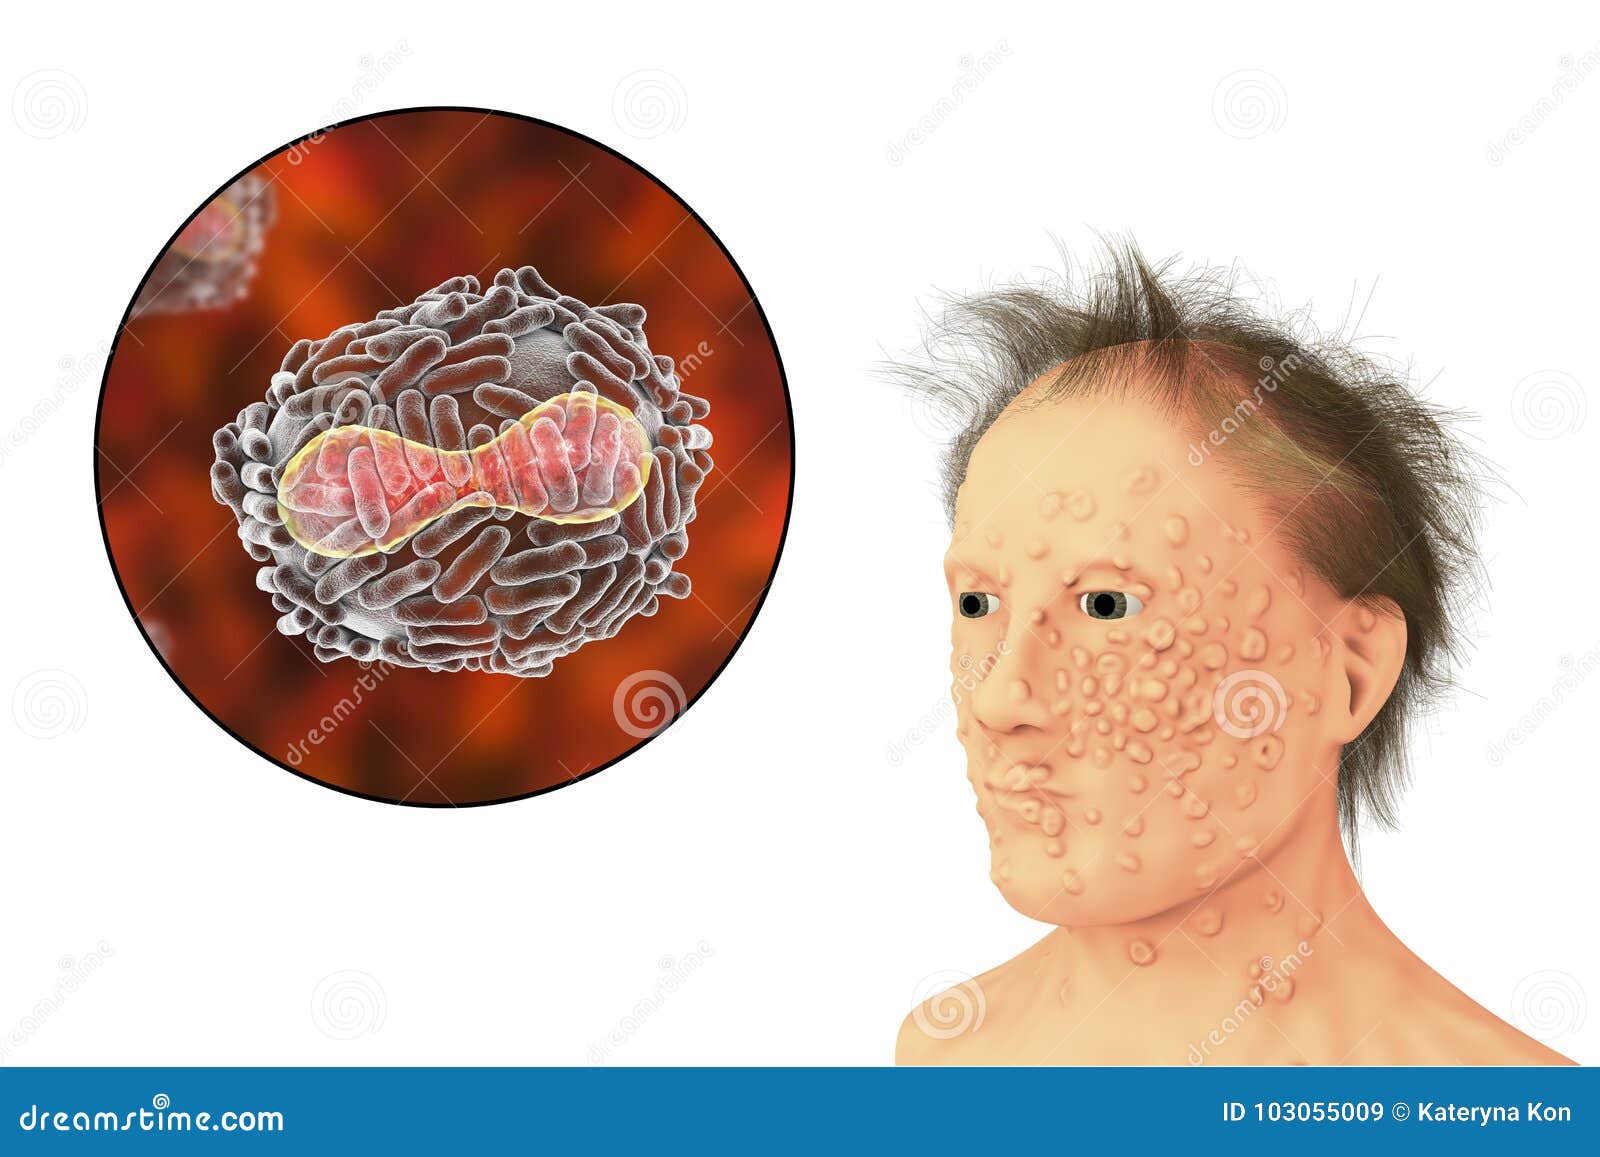 a man with smallpox infection and variola virus, a virus from orthopoxviridae family that causes smallpox